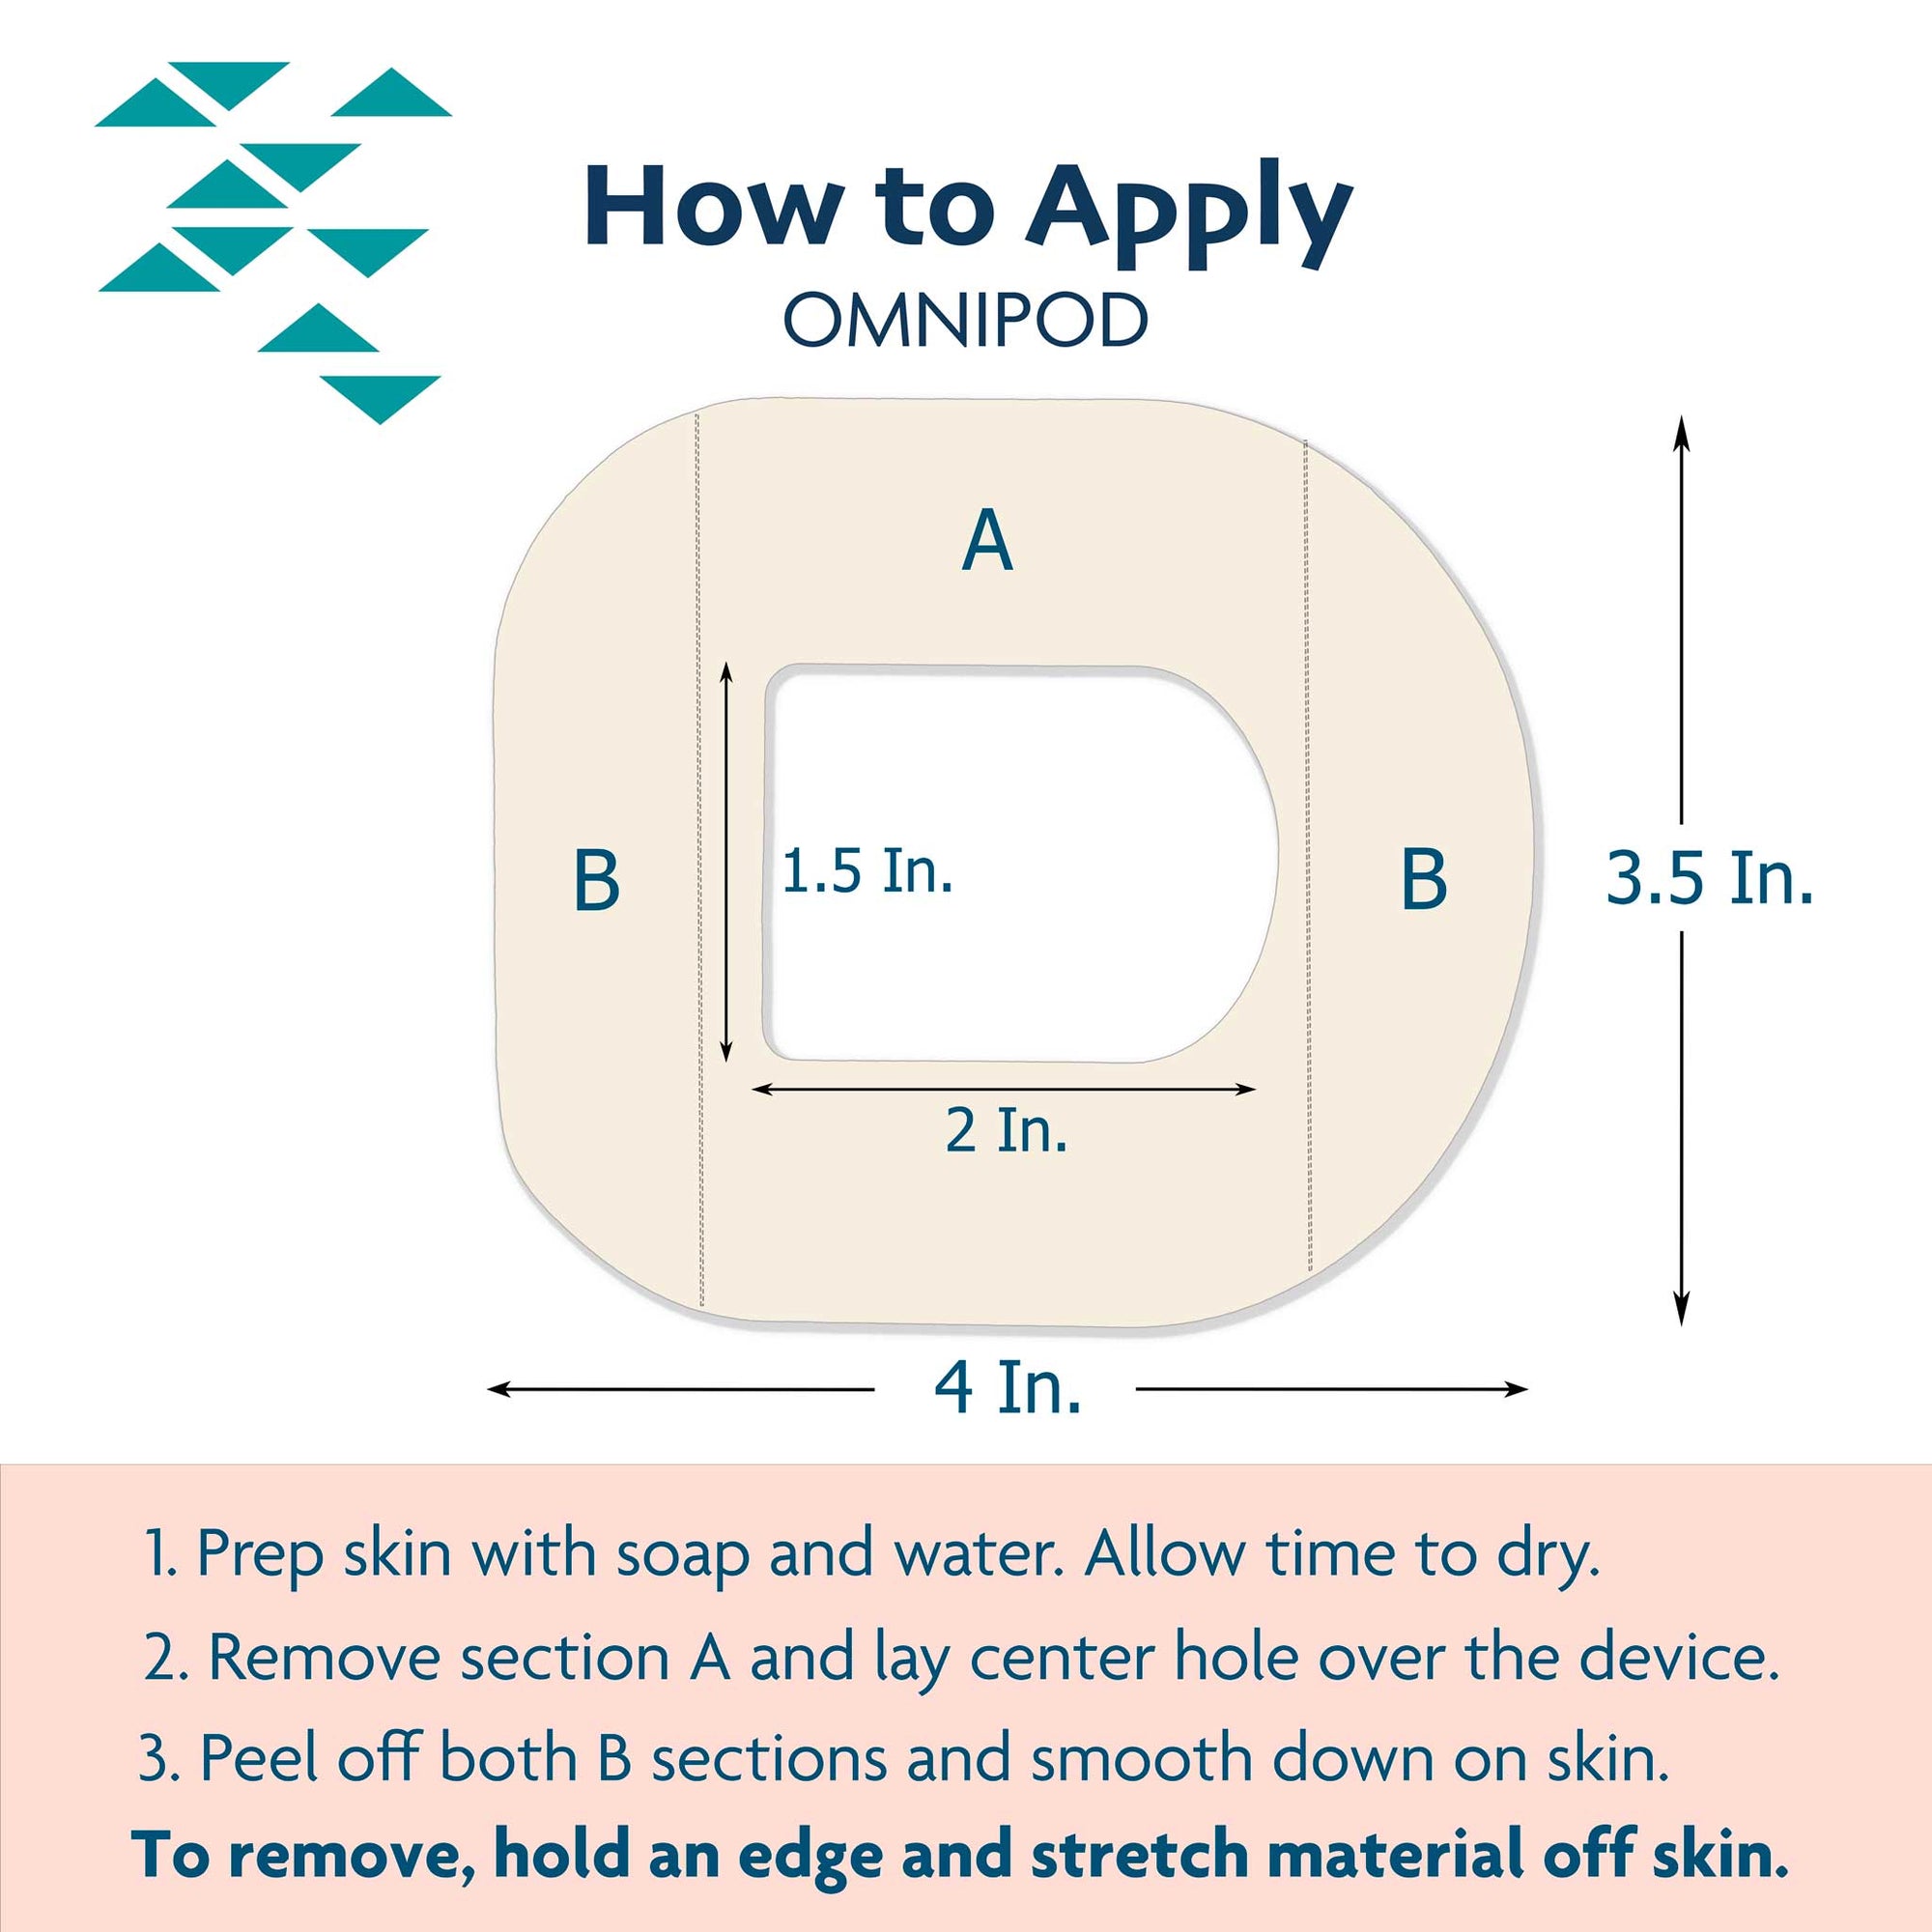 ExpressionMed Omnipod Adhesive Tape Application instructions and Dimensions